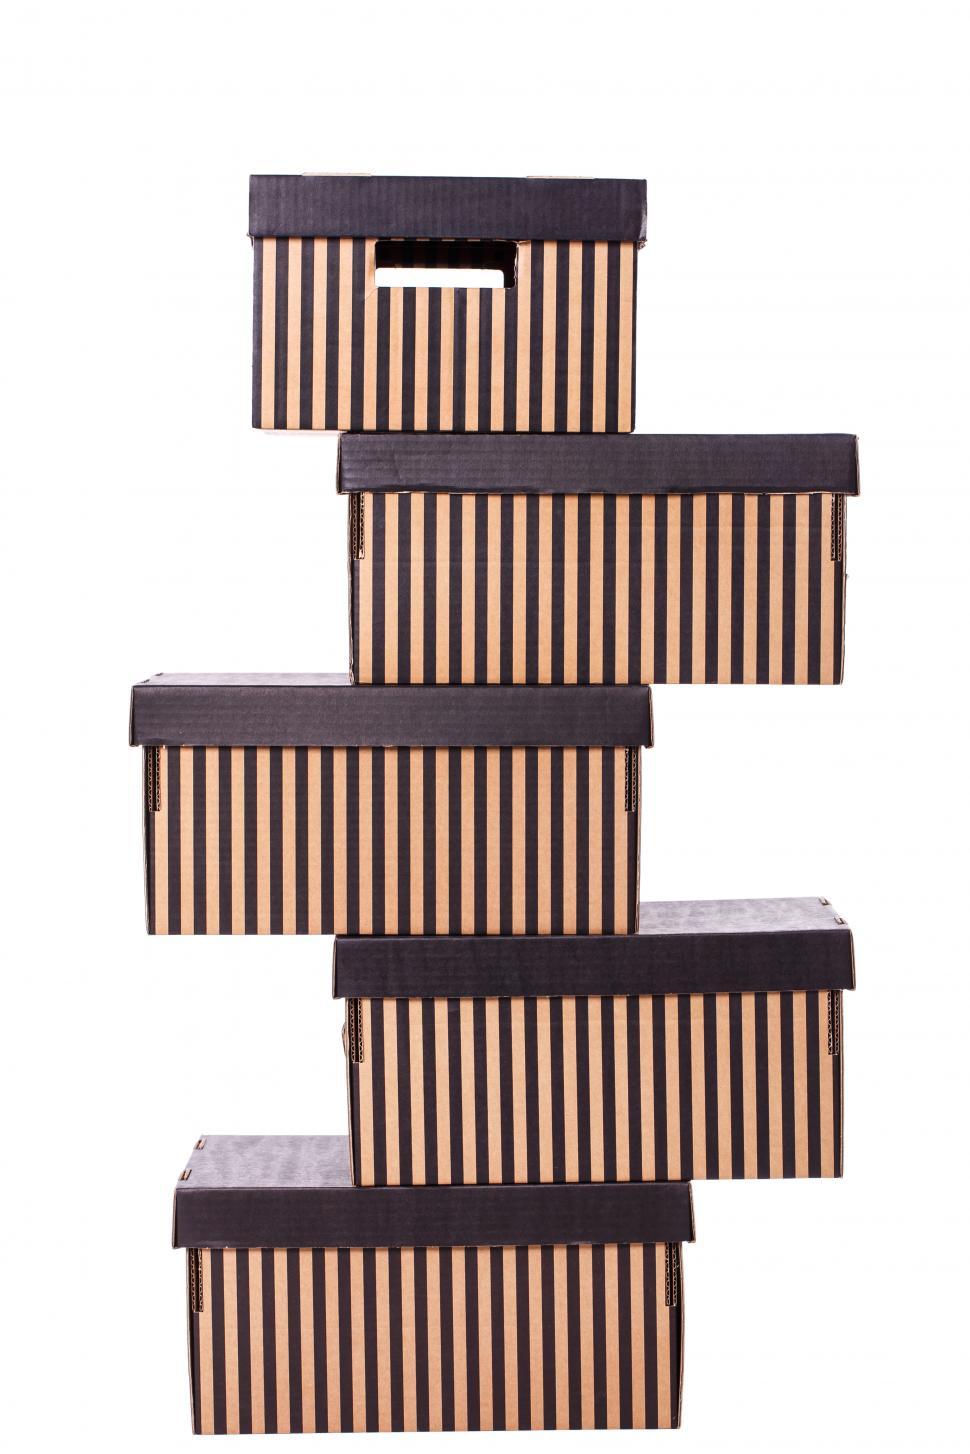 Free Image of Striped boxes on a white background 